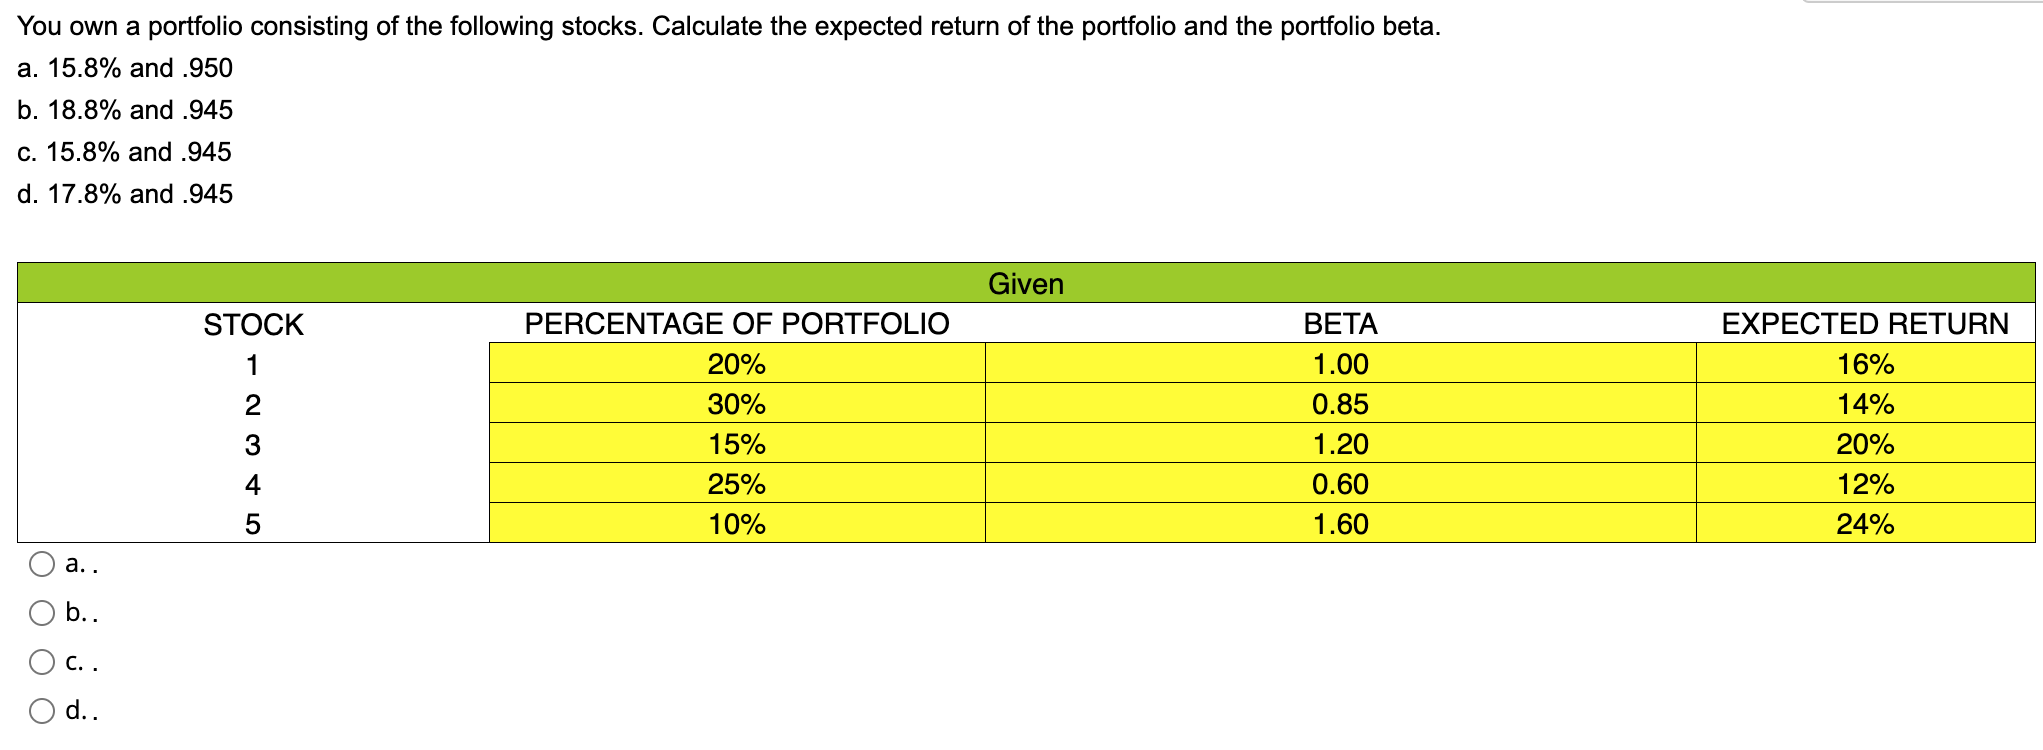 You own a portfolio consisting of the following stocks. Calculate the expected return of the portfolio and the portfolio beta.
a. 15.8% and .950
b. 18.8% and .945
c. 15.8% and .945
d. 17.8% and .945
O O
a..
b..
C. .
d..
STOCK
1
2345
PERCENTAGE OF PORTFOLIO
20%
30%
15%
25%
10%
Given
BETA
1.00
0.85
1.20
0.60
1.60
EXPECTED RETURN
16%
14%
20%
12%
24%